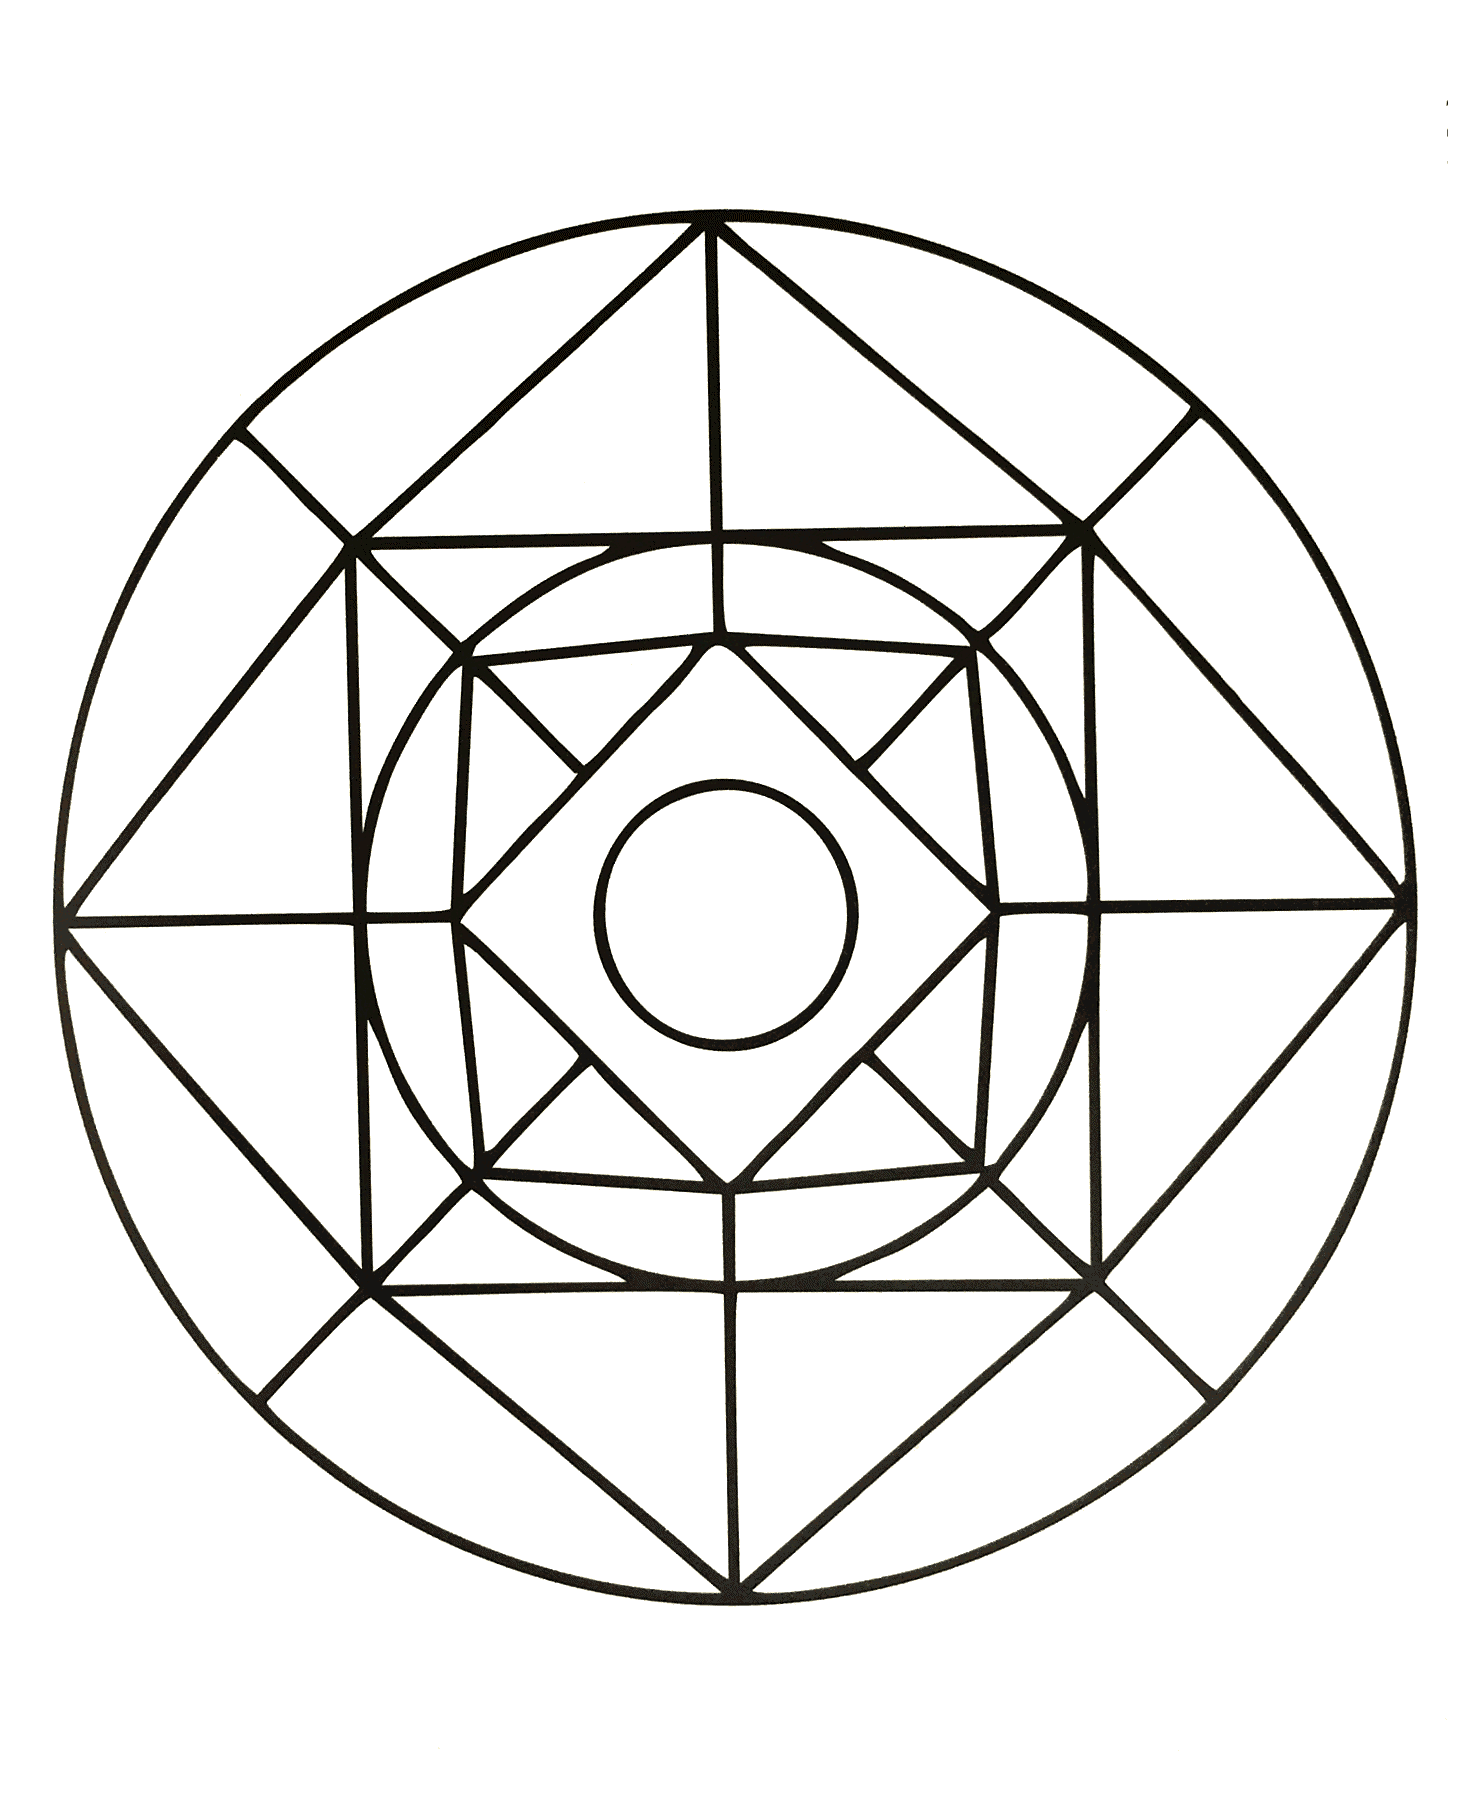 A perfect Mandala if you want simplicity or if you have little time to color. Feel free to let your instincts decide where to color, and what colors to choose.